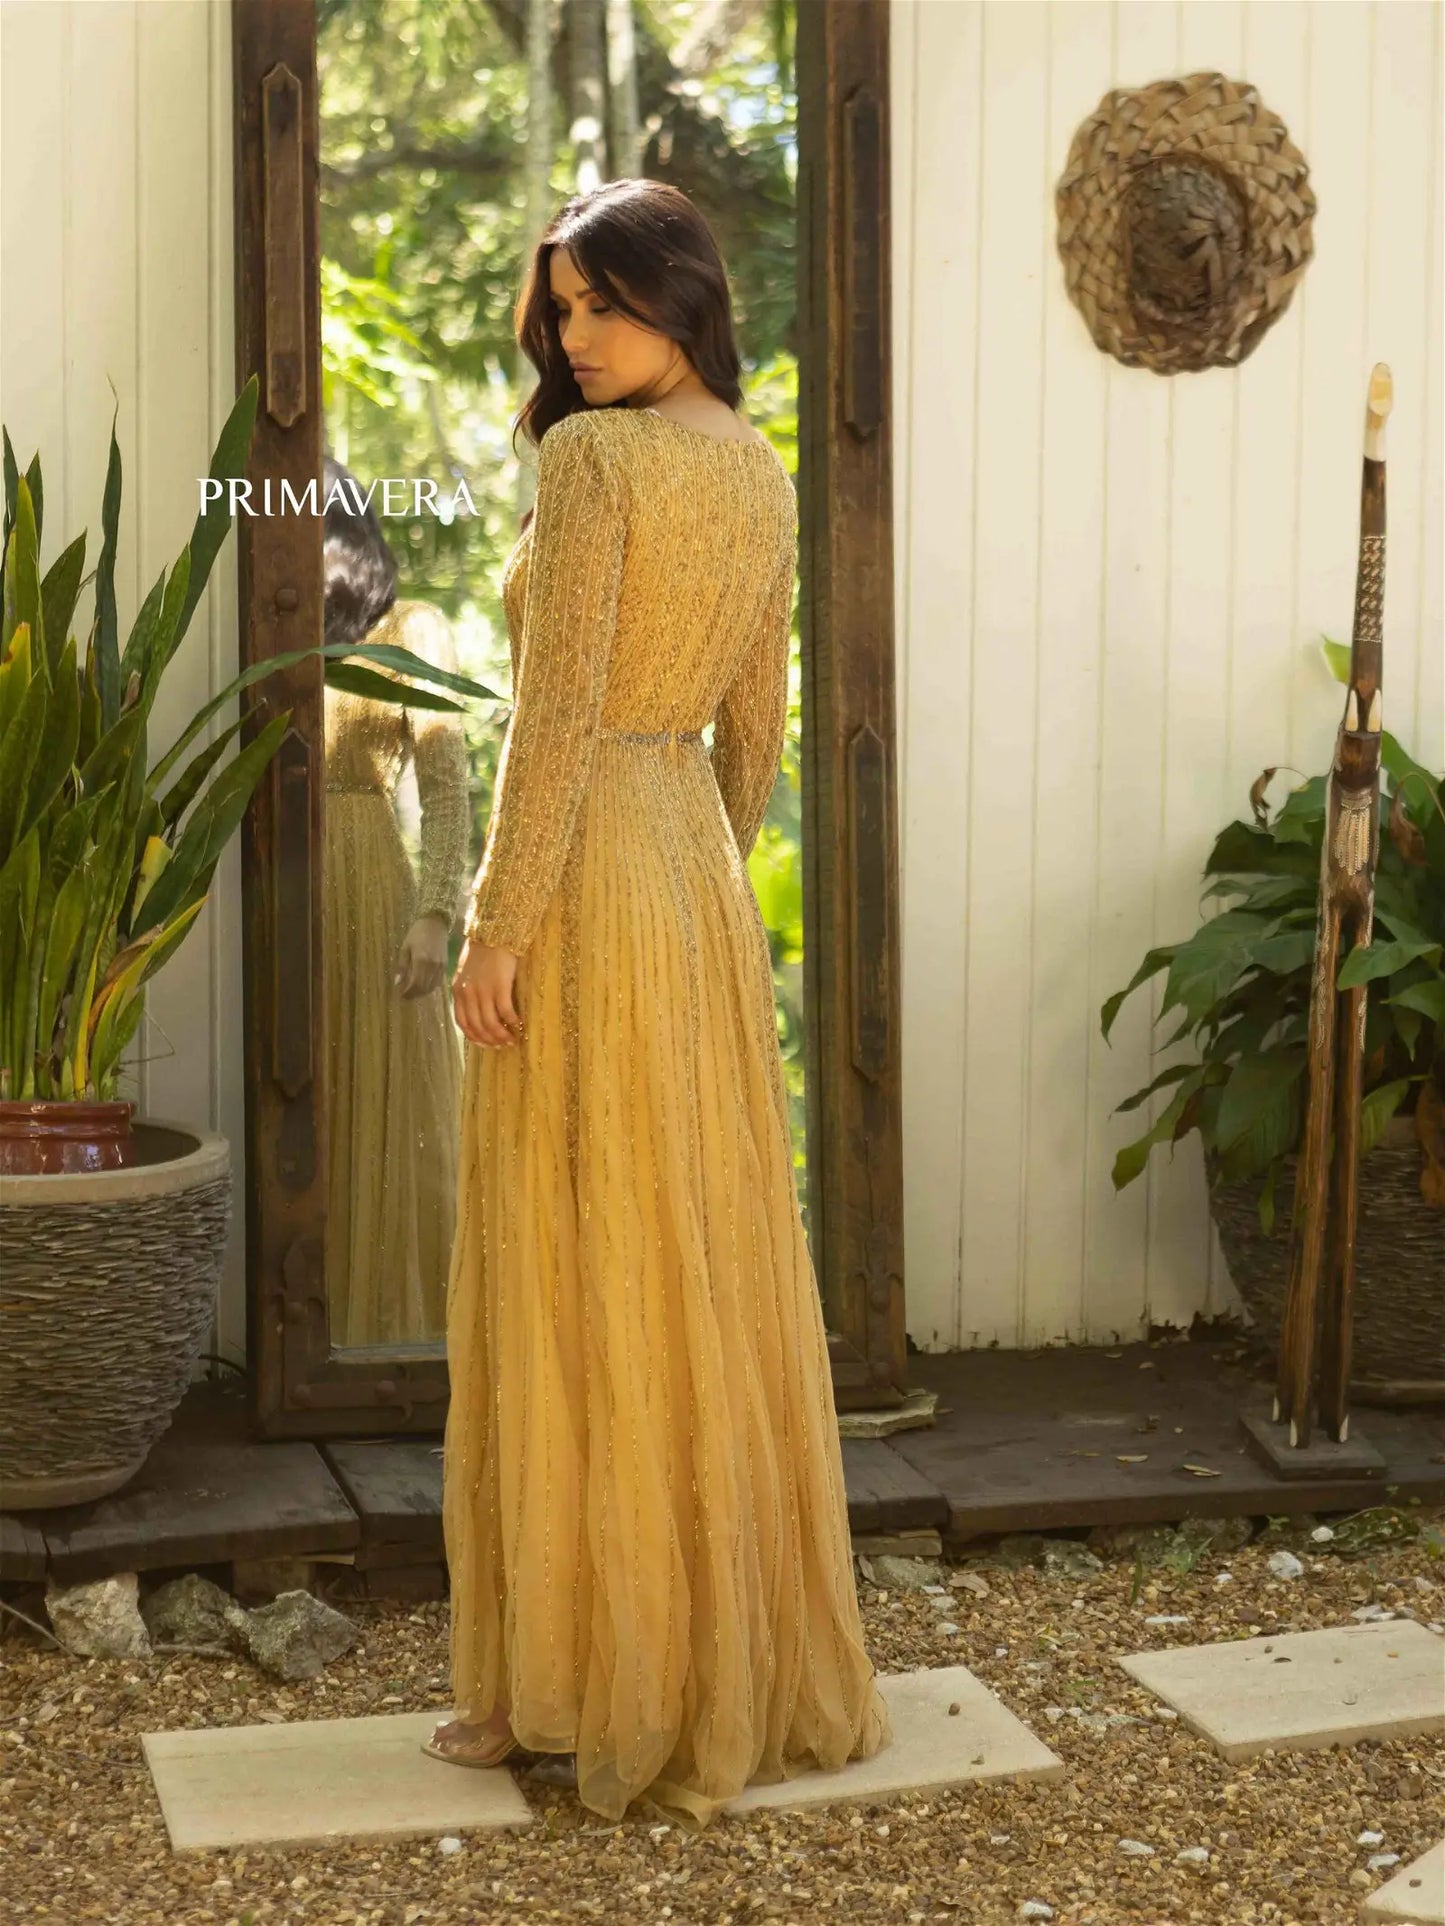 Primavera Couture 12010 Prom Dress Long Beaded Dress. This gown is beautiful on also has long sleeves. 